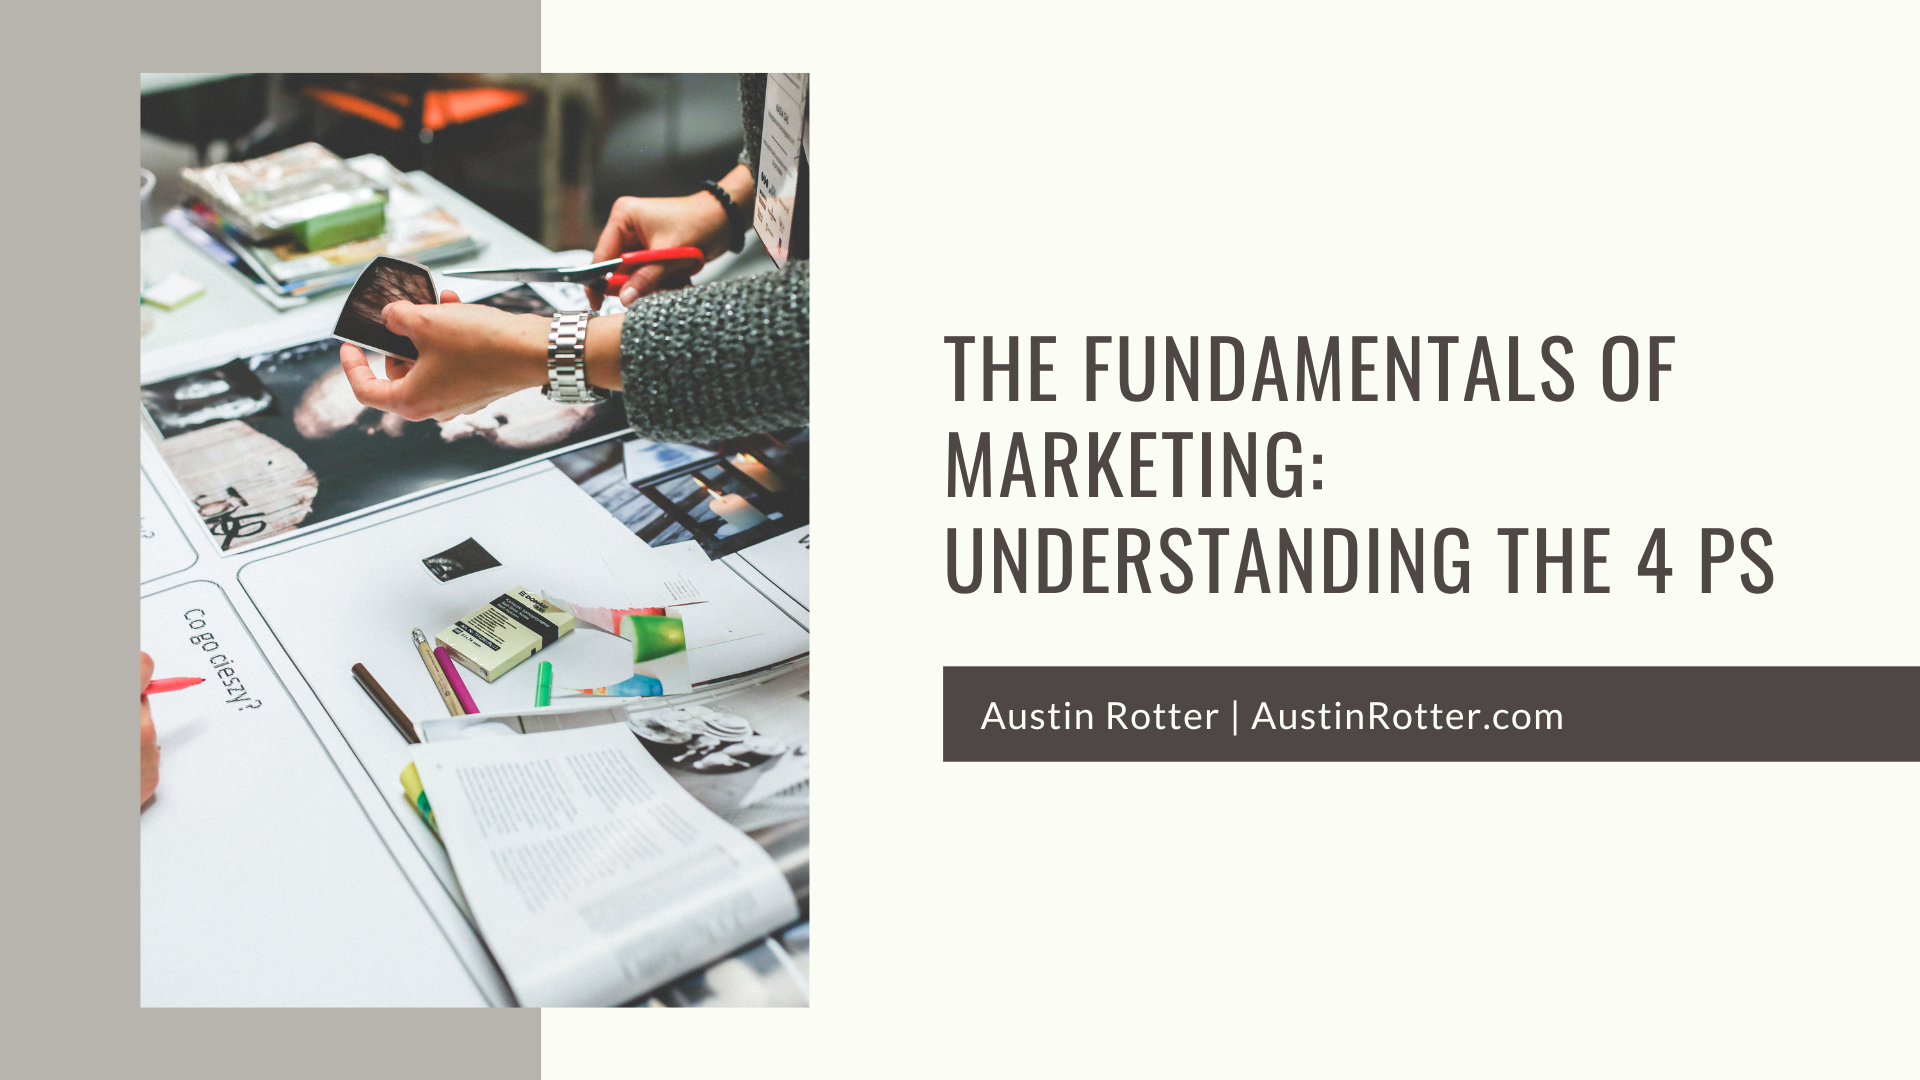 THE FUNDAMENTALS OF
MARKETING:
UNDERSTANDING THE 4 PS

 

Austin Rotter | AustinRotter.com